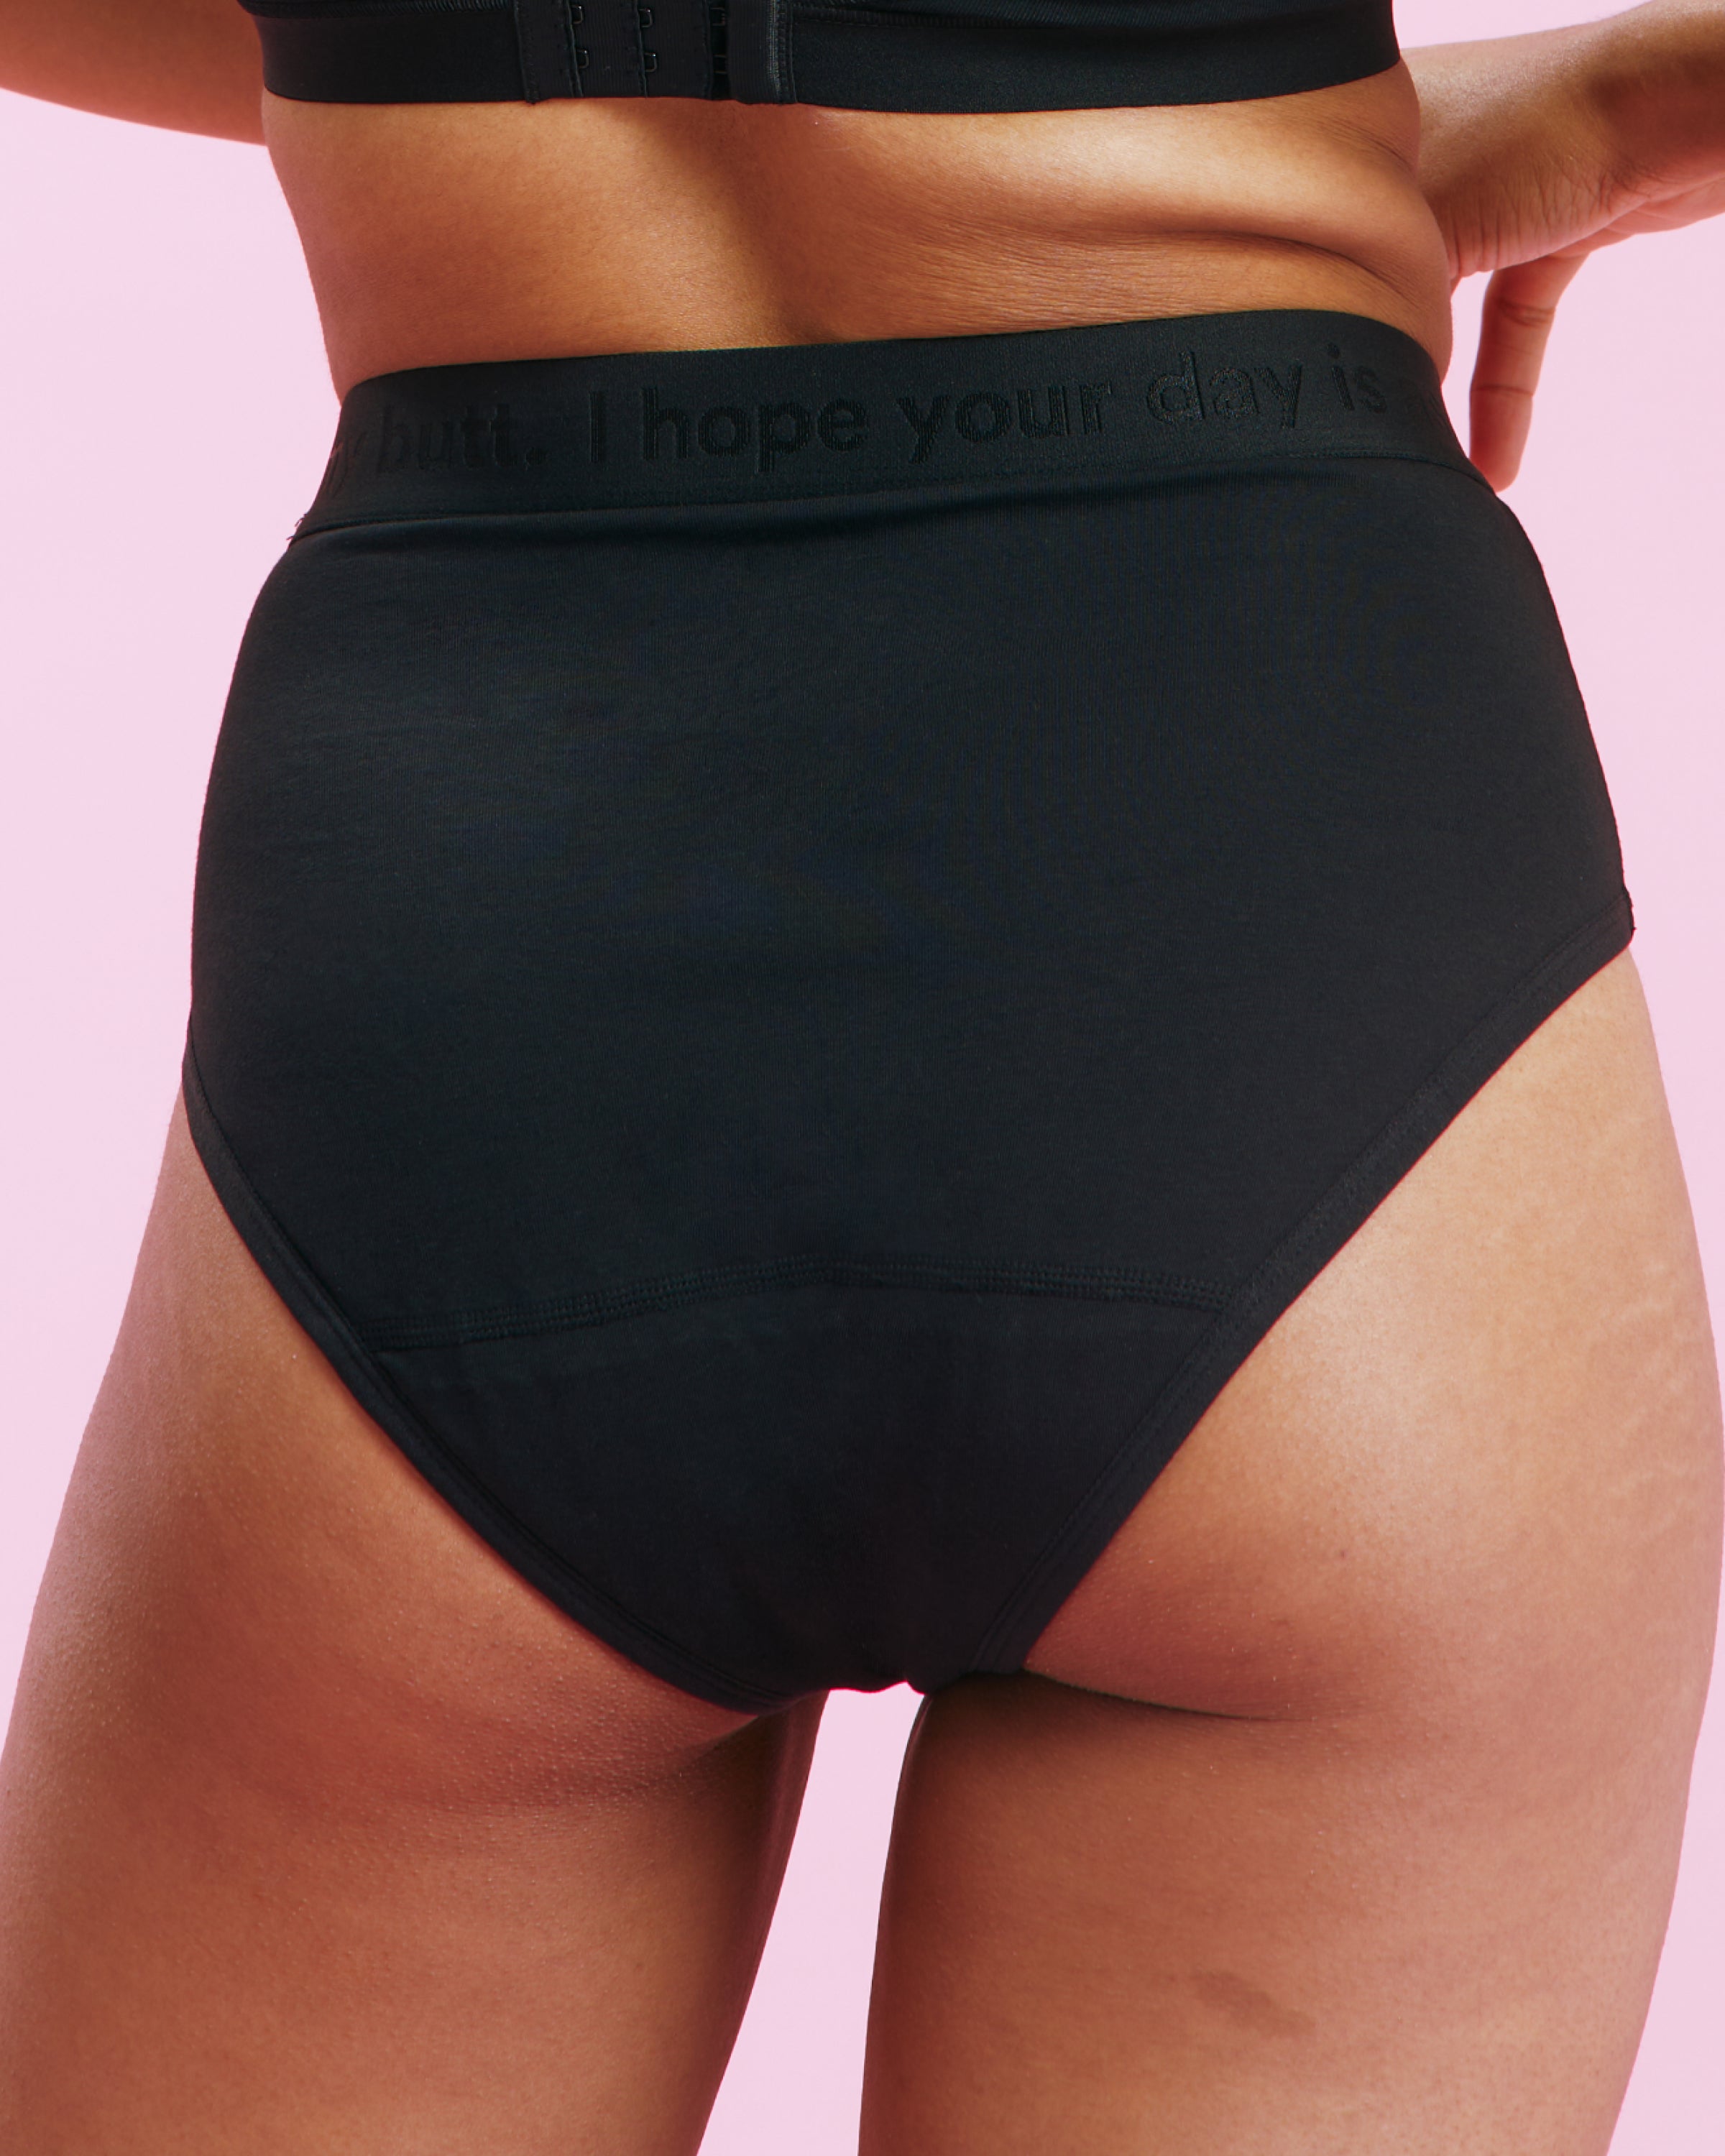 Period Panty – Extra Strong – High Waist